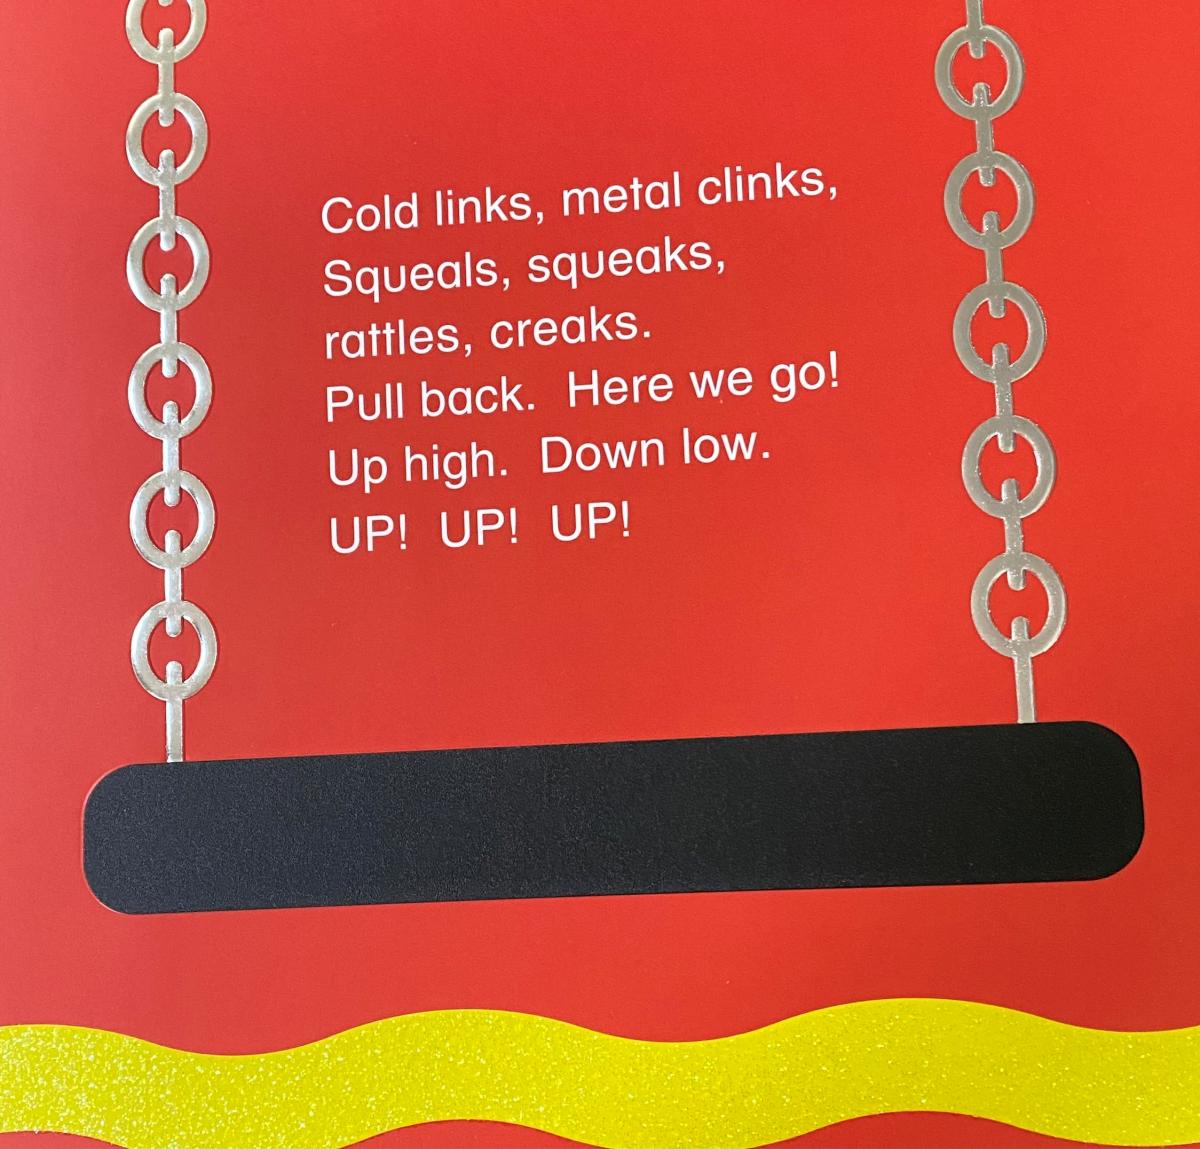 Page 6 of the book with a swing that has a metal chain on each side